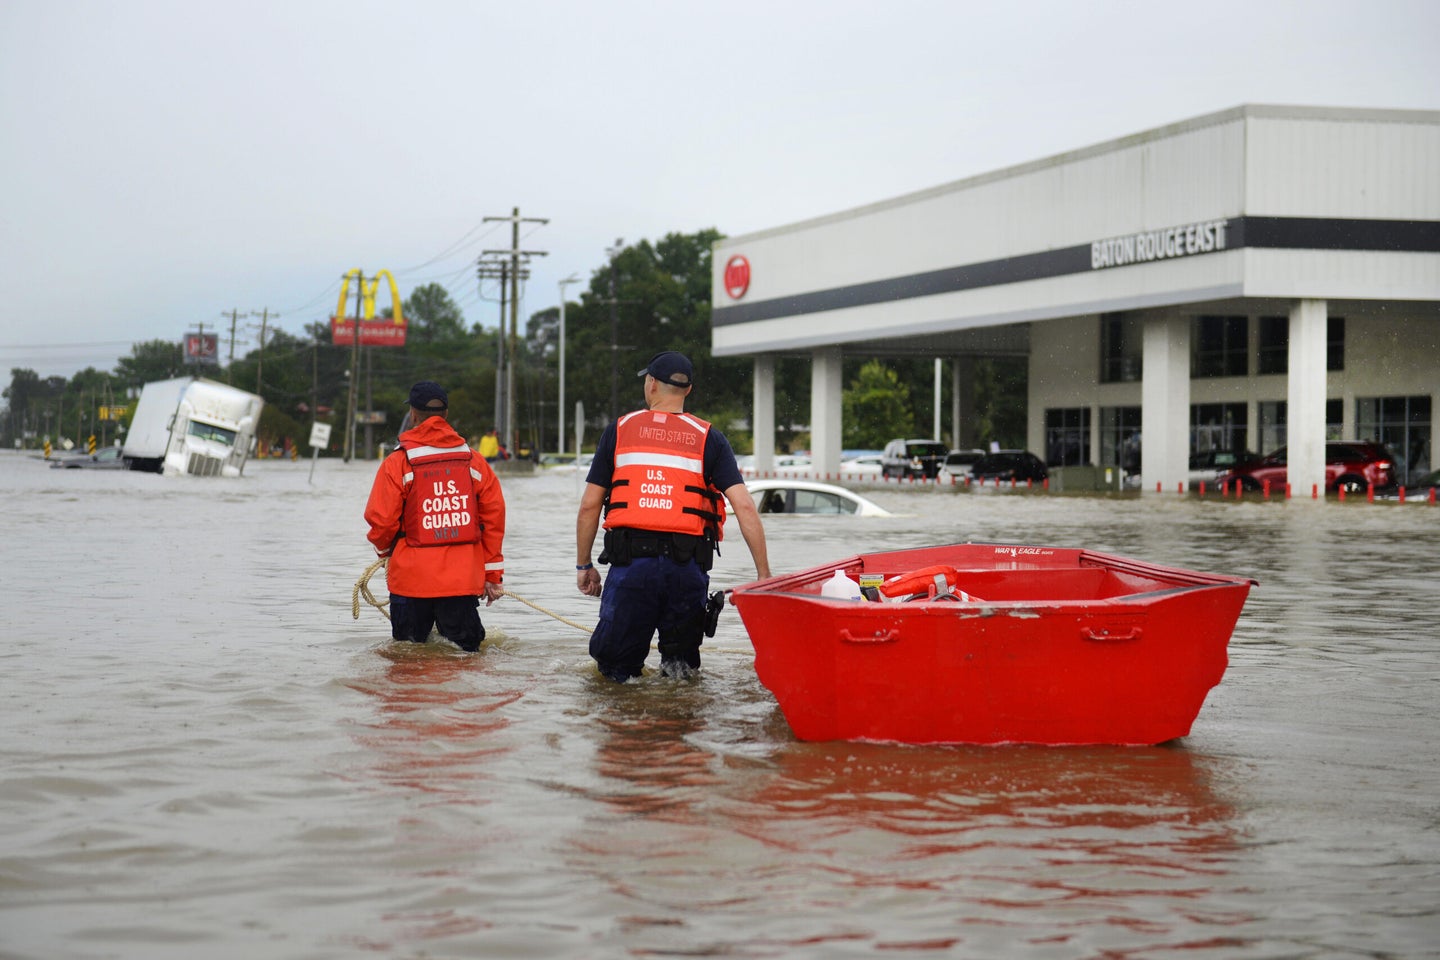 Coast Guardsmen use a flat-bottom boat to assist residents during severe flooding around Baton Rouge, La., Aug. 14, 2016. Coast Guard photo by Petty Officer 3rd Class Brandon Giles